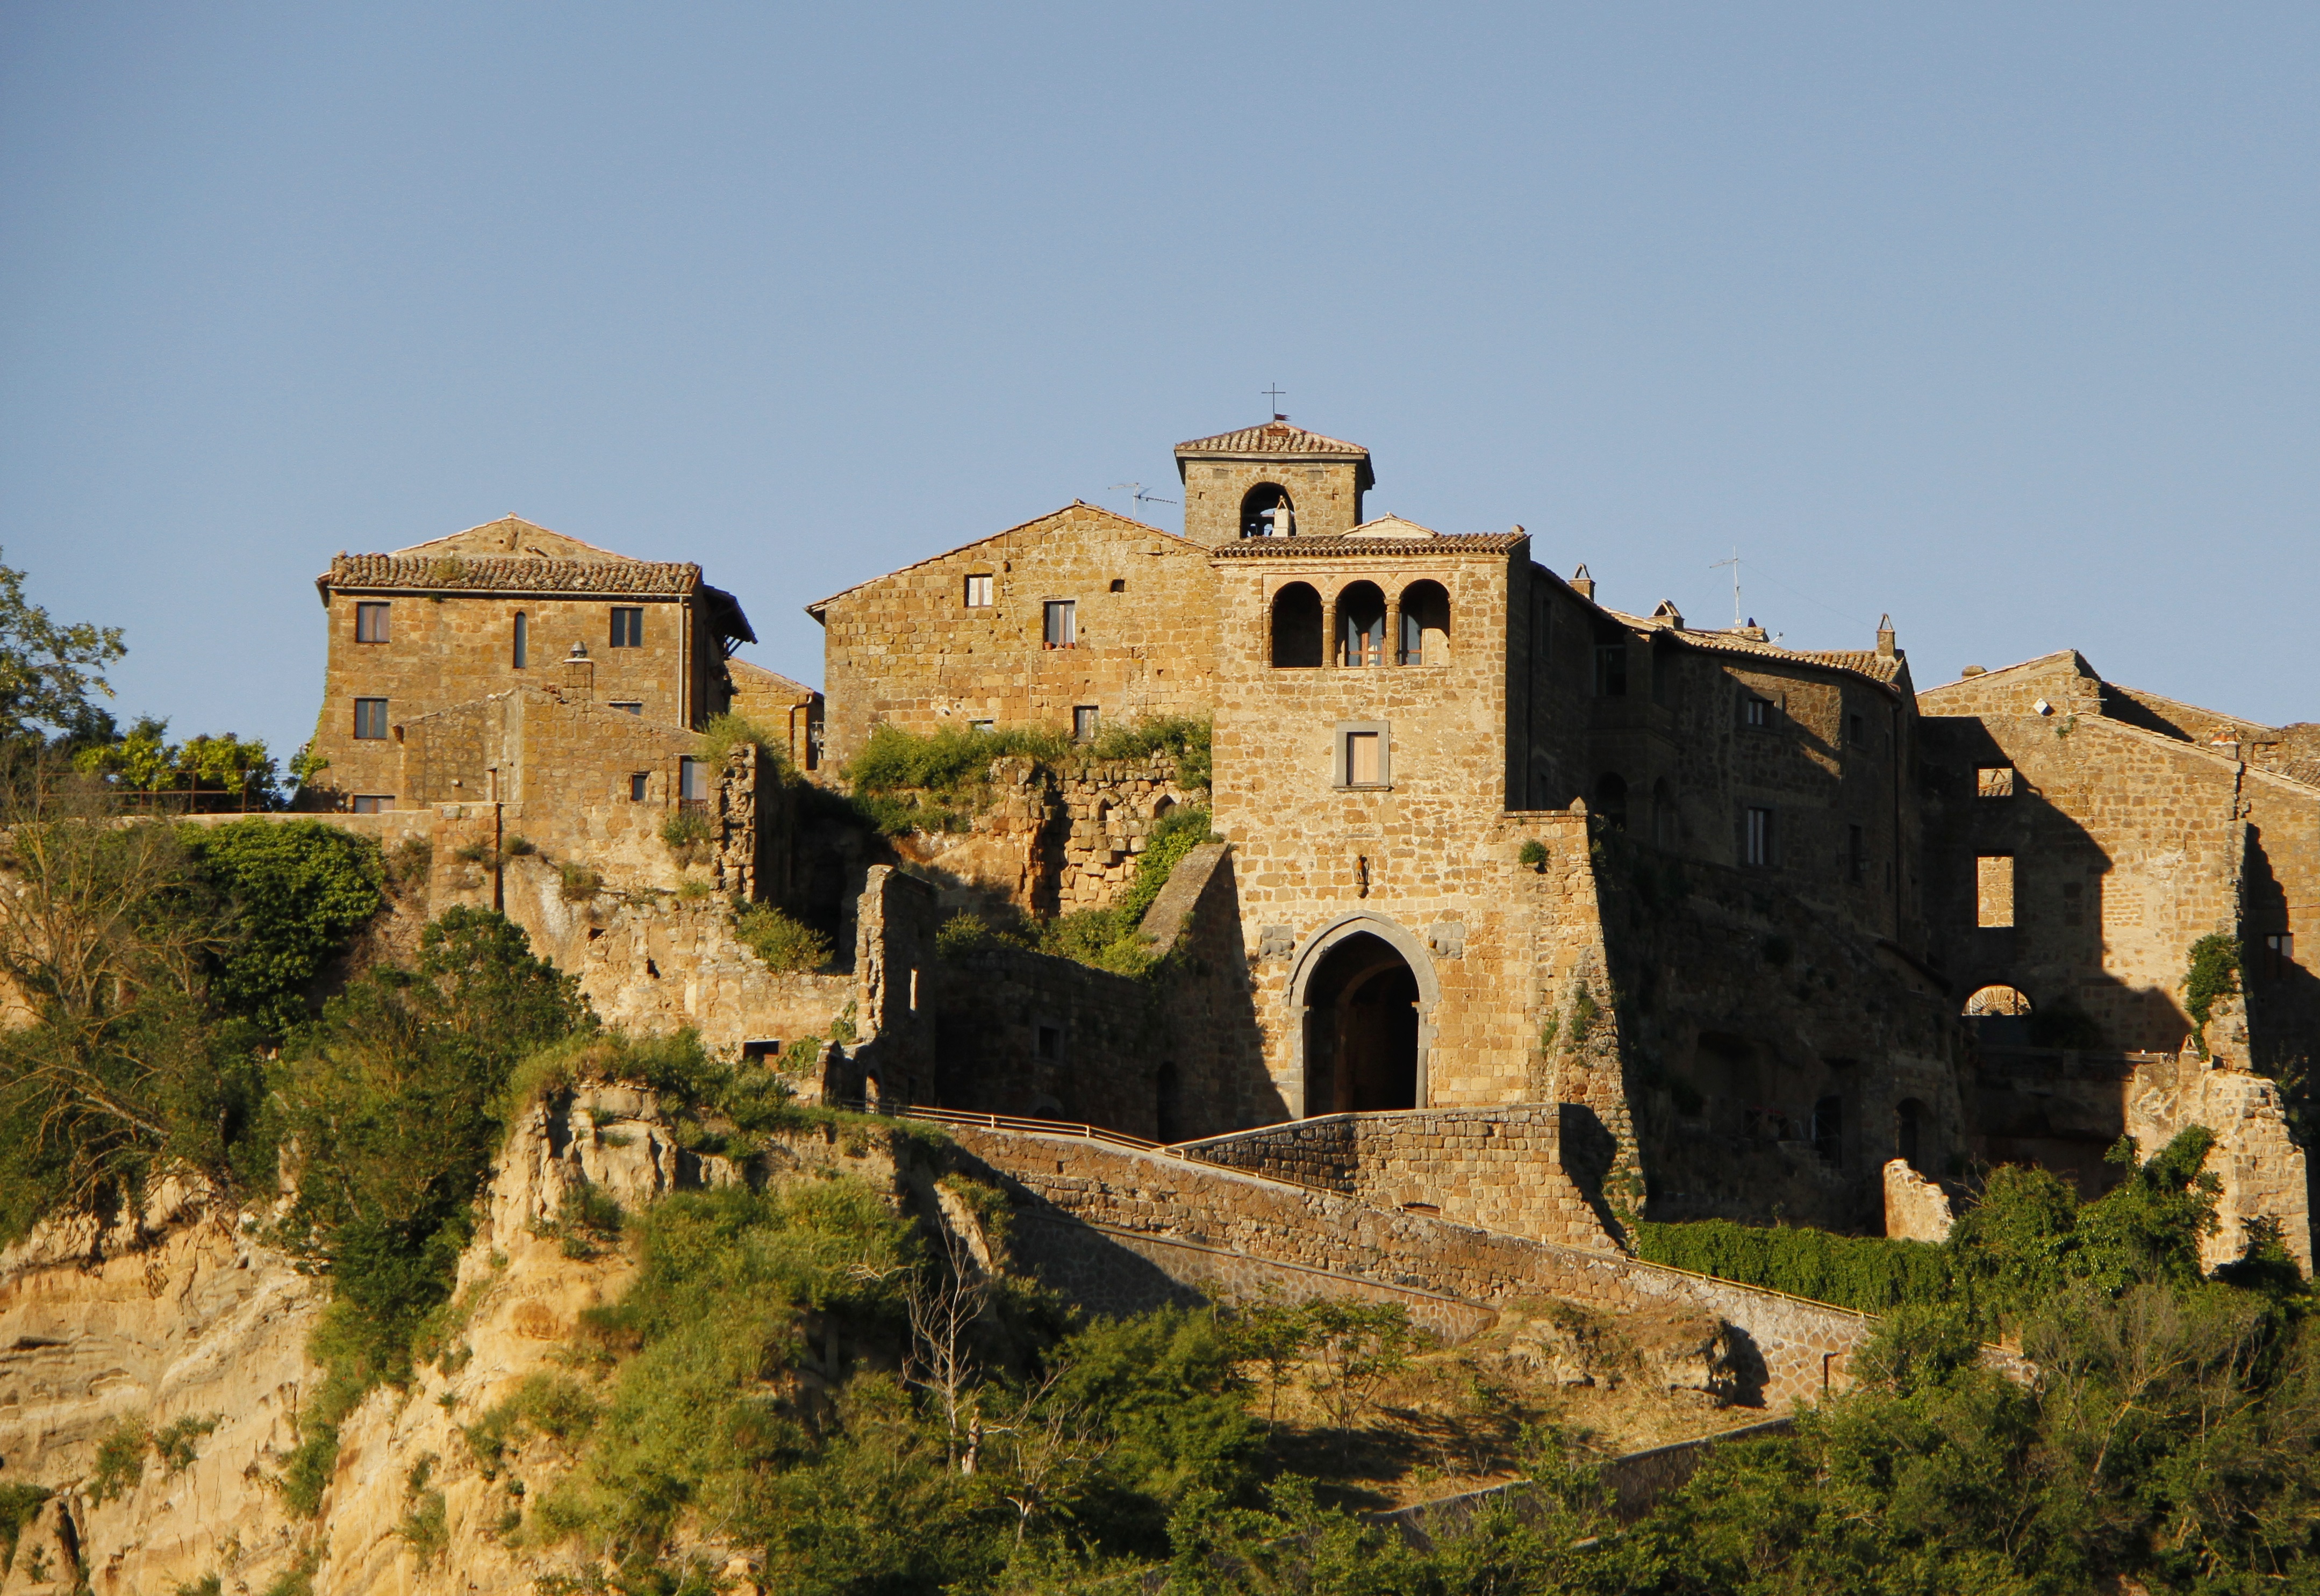 Our Two Nights in Civita di Bagnoregio | Places That Speak by Mary Jane